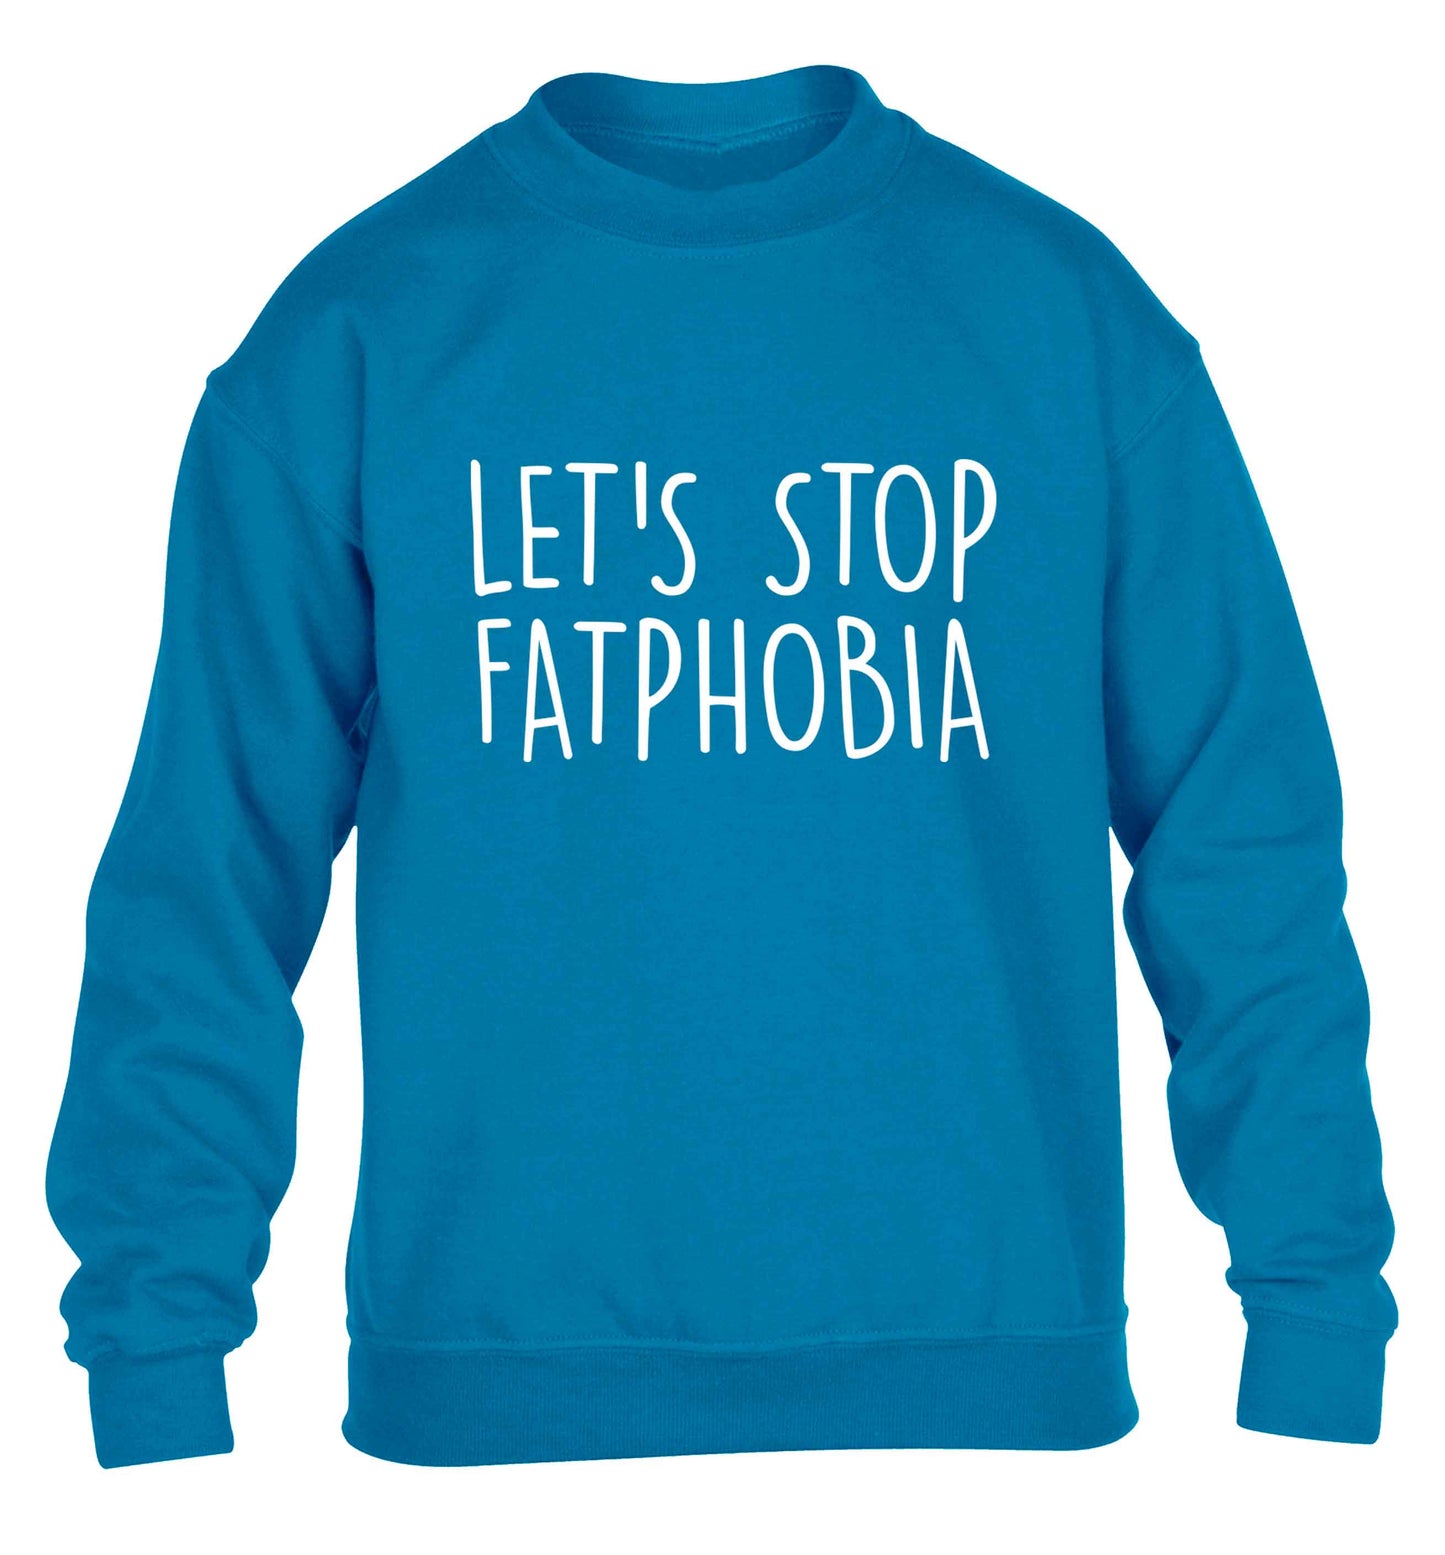 Let's stop fatphobia children's blue sweater 12-13 Years